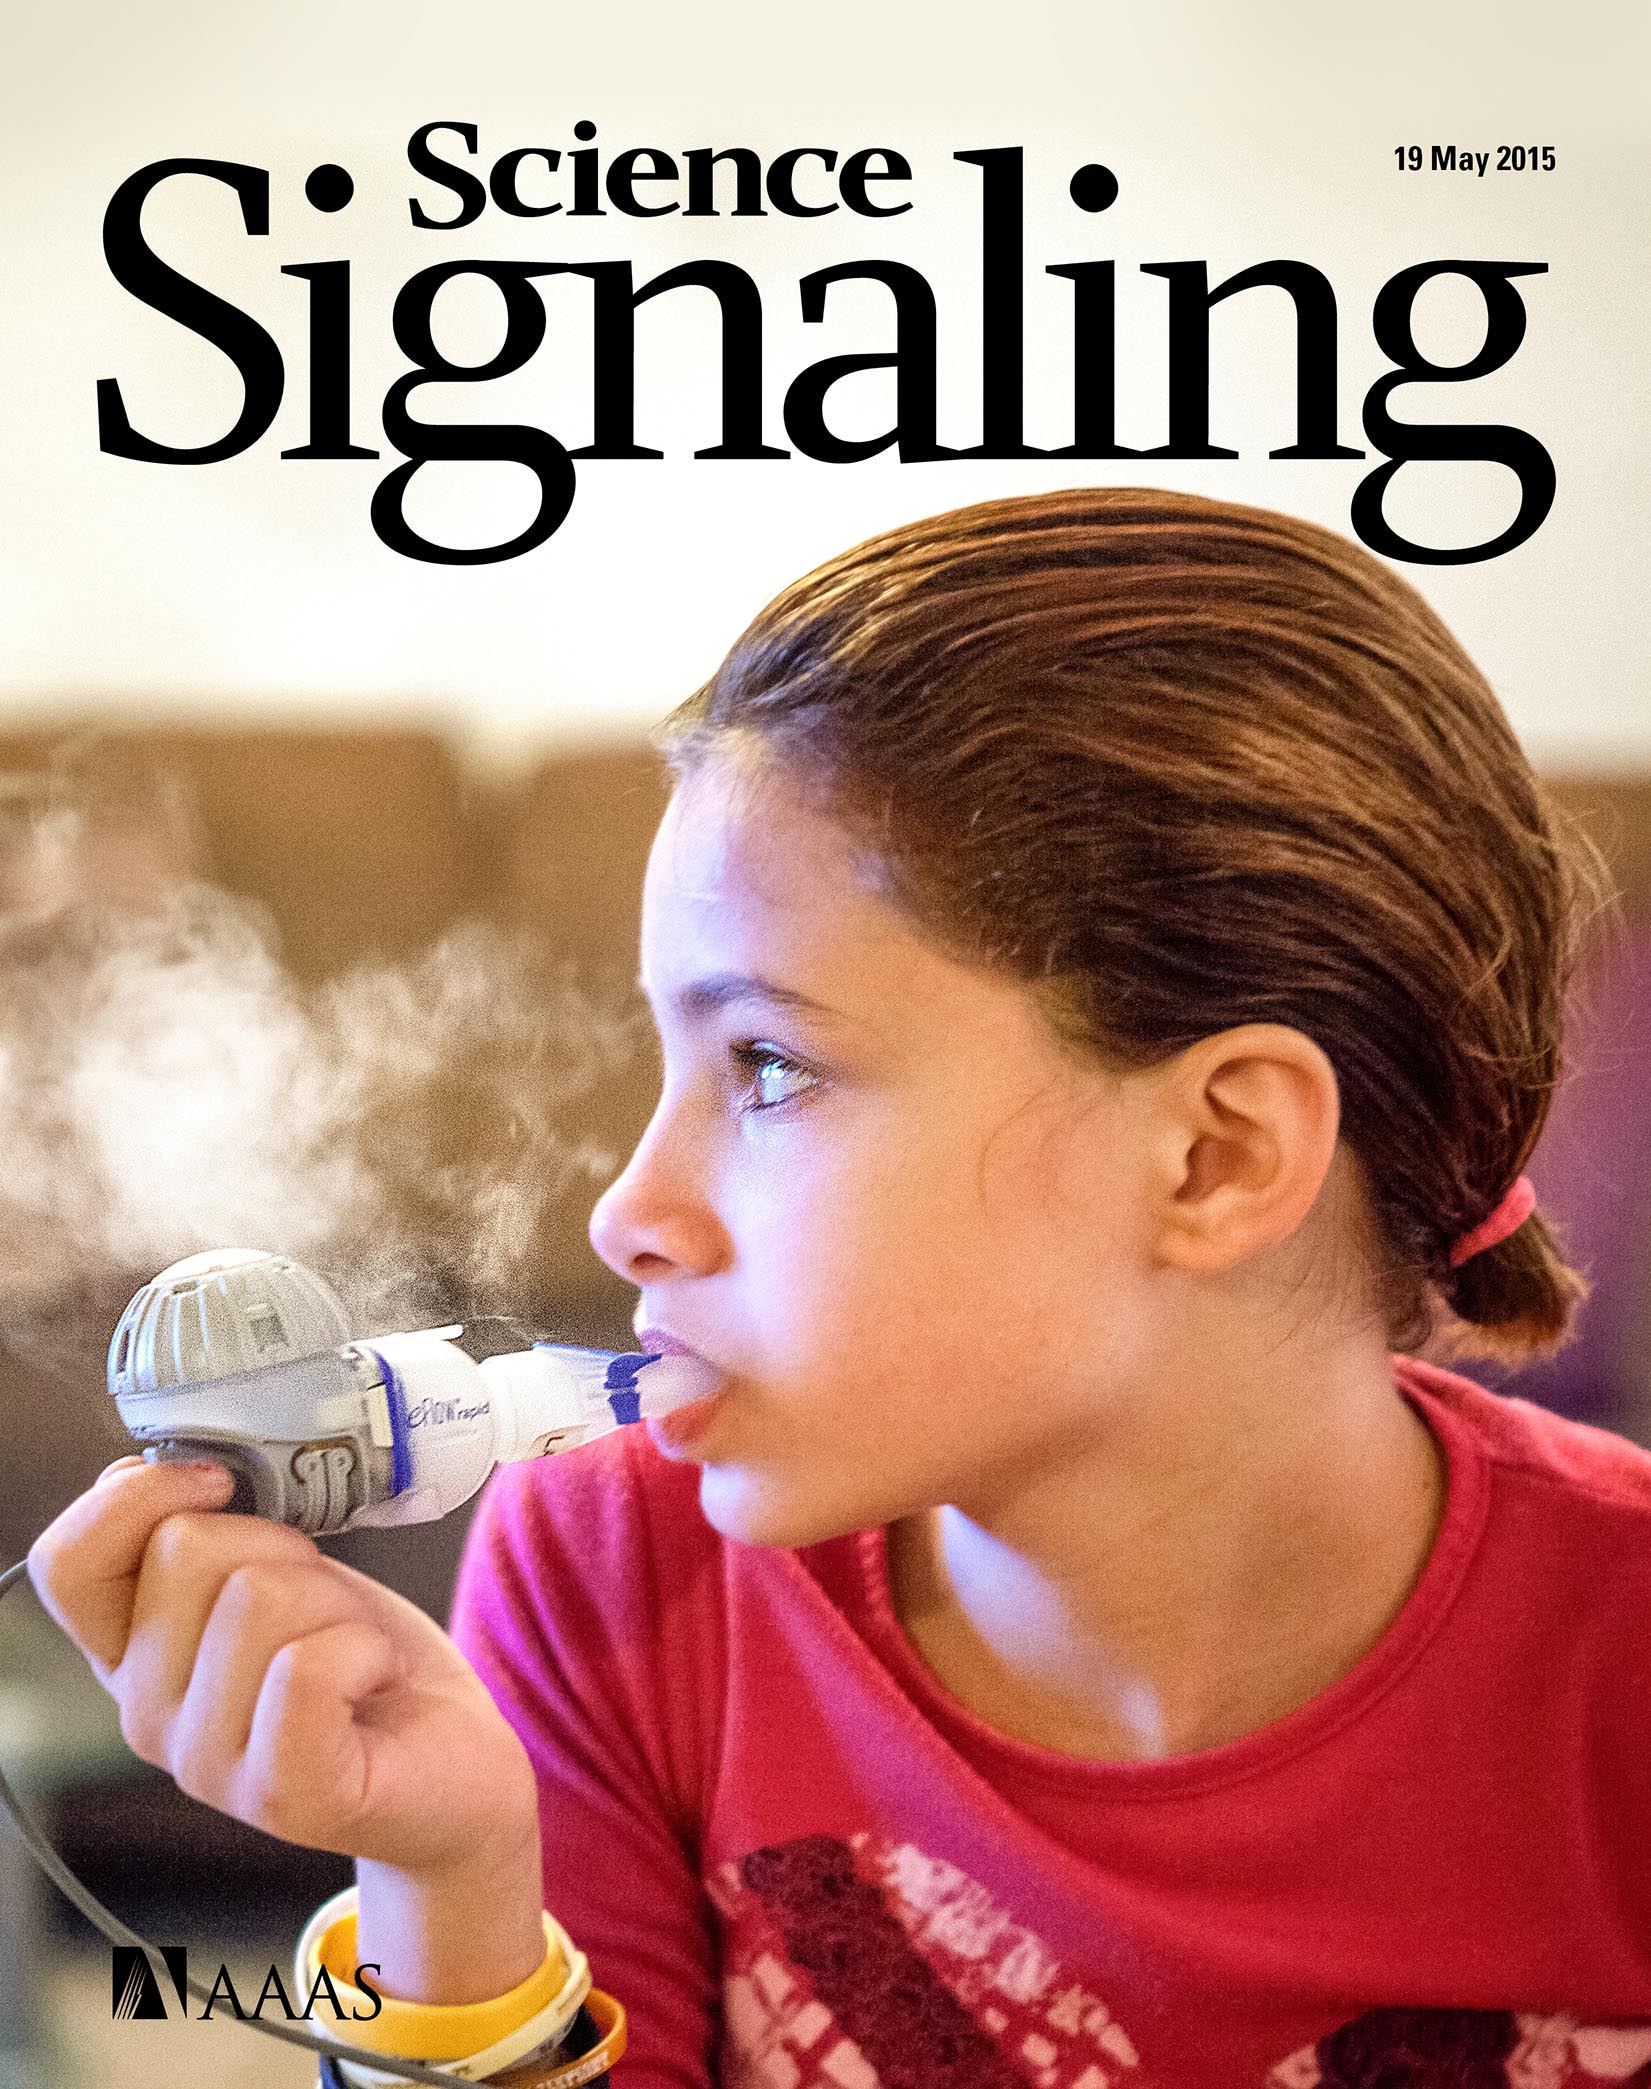 The study led by Paulo Matos featured on the cover of the journal Science Signalling